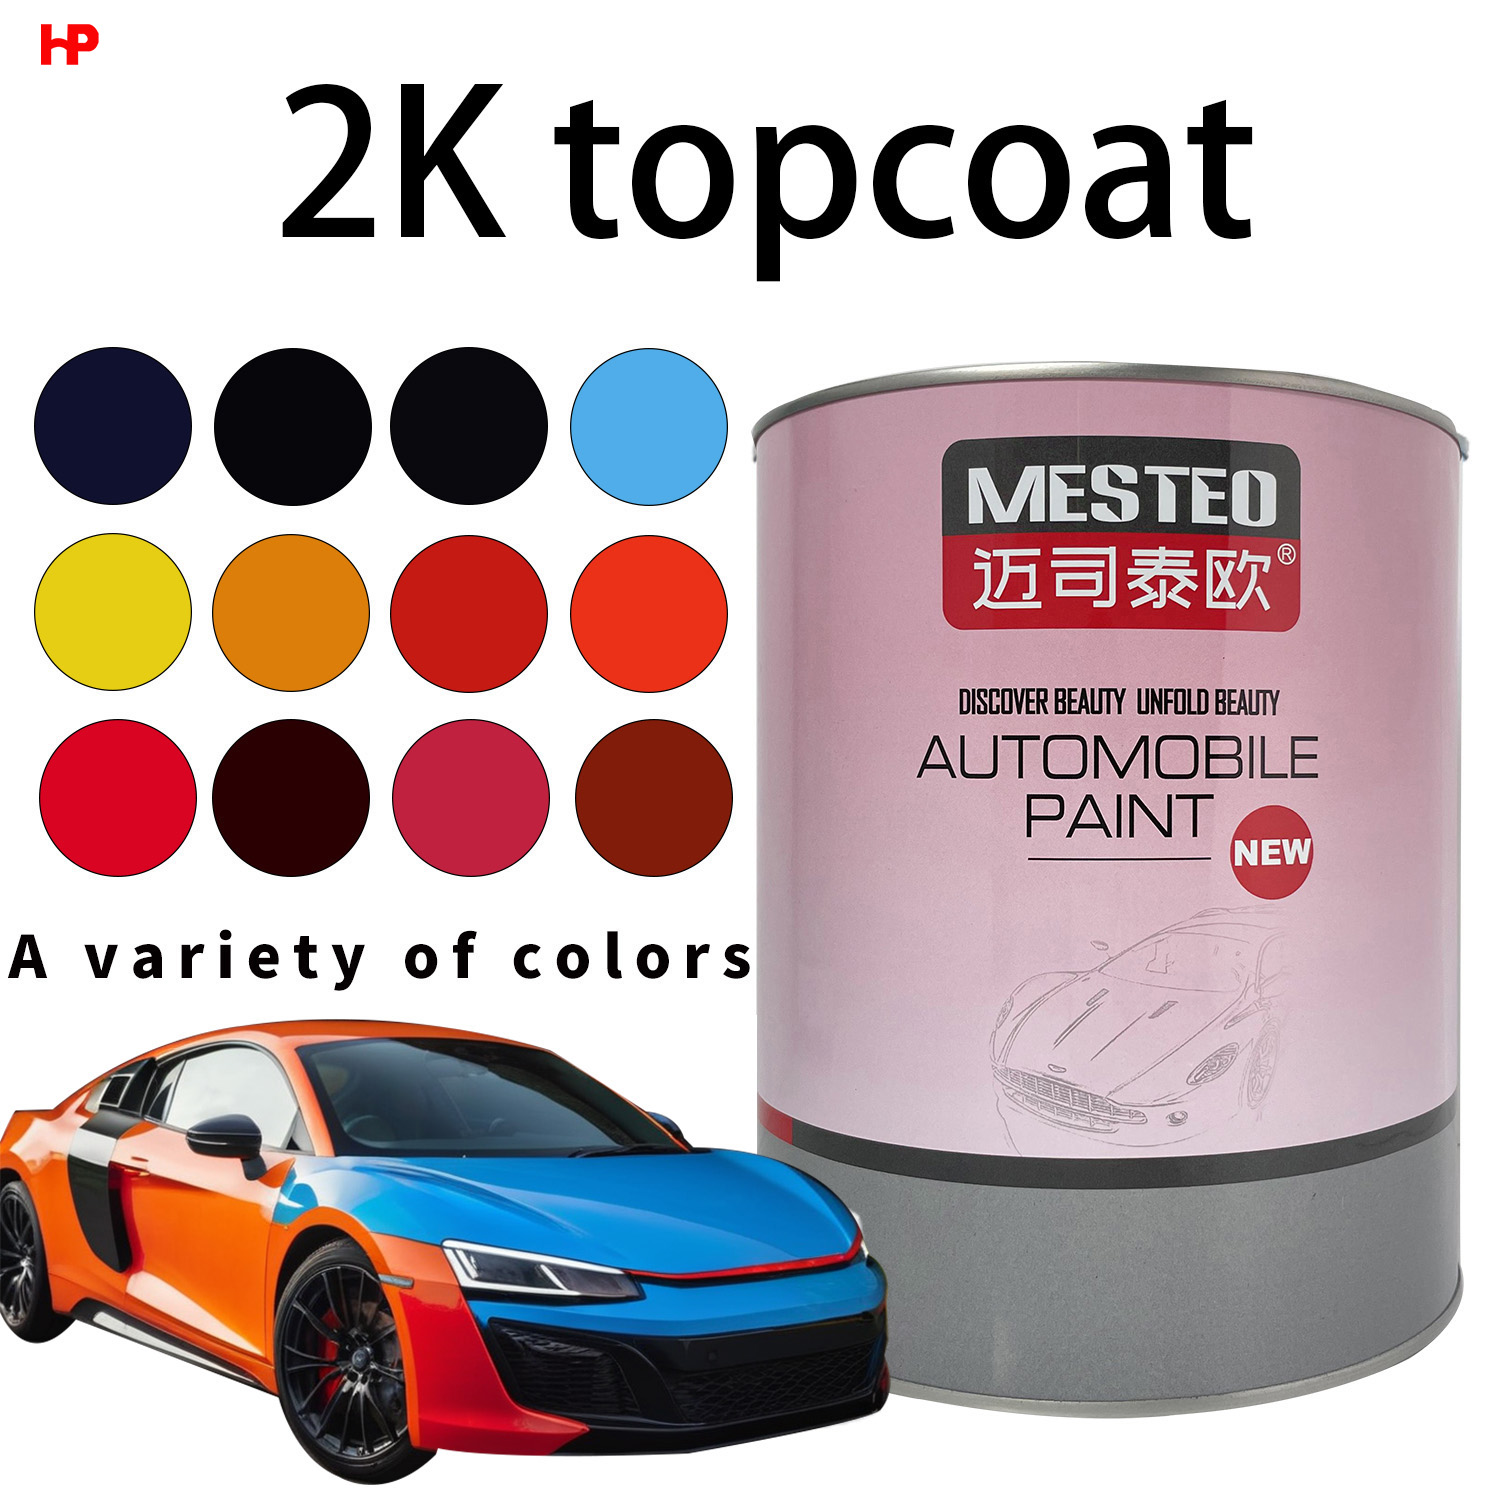 Hengpu 2K Topcoat, Professional Manufactured Car Paints With Good Coverage Good Color, Acrylic High Chroma High Saturation Auto Paints